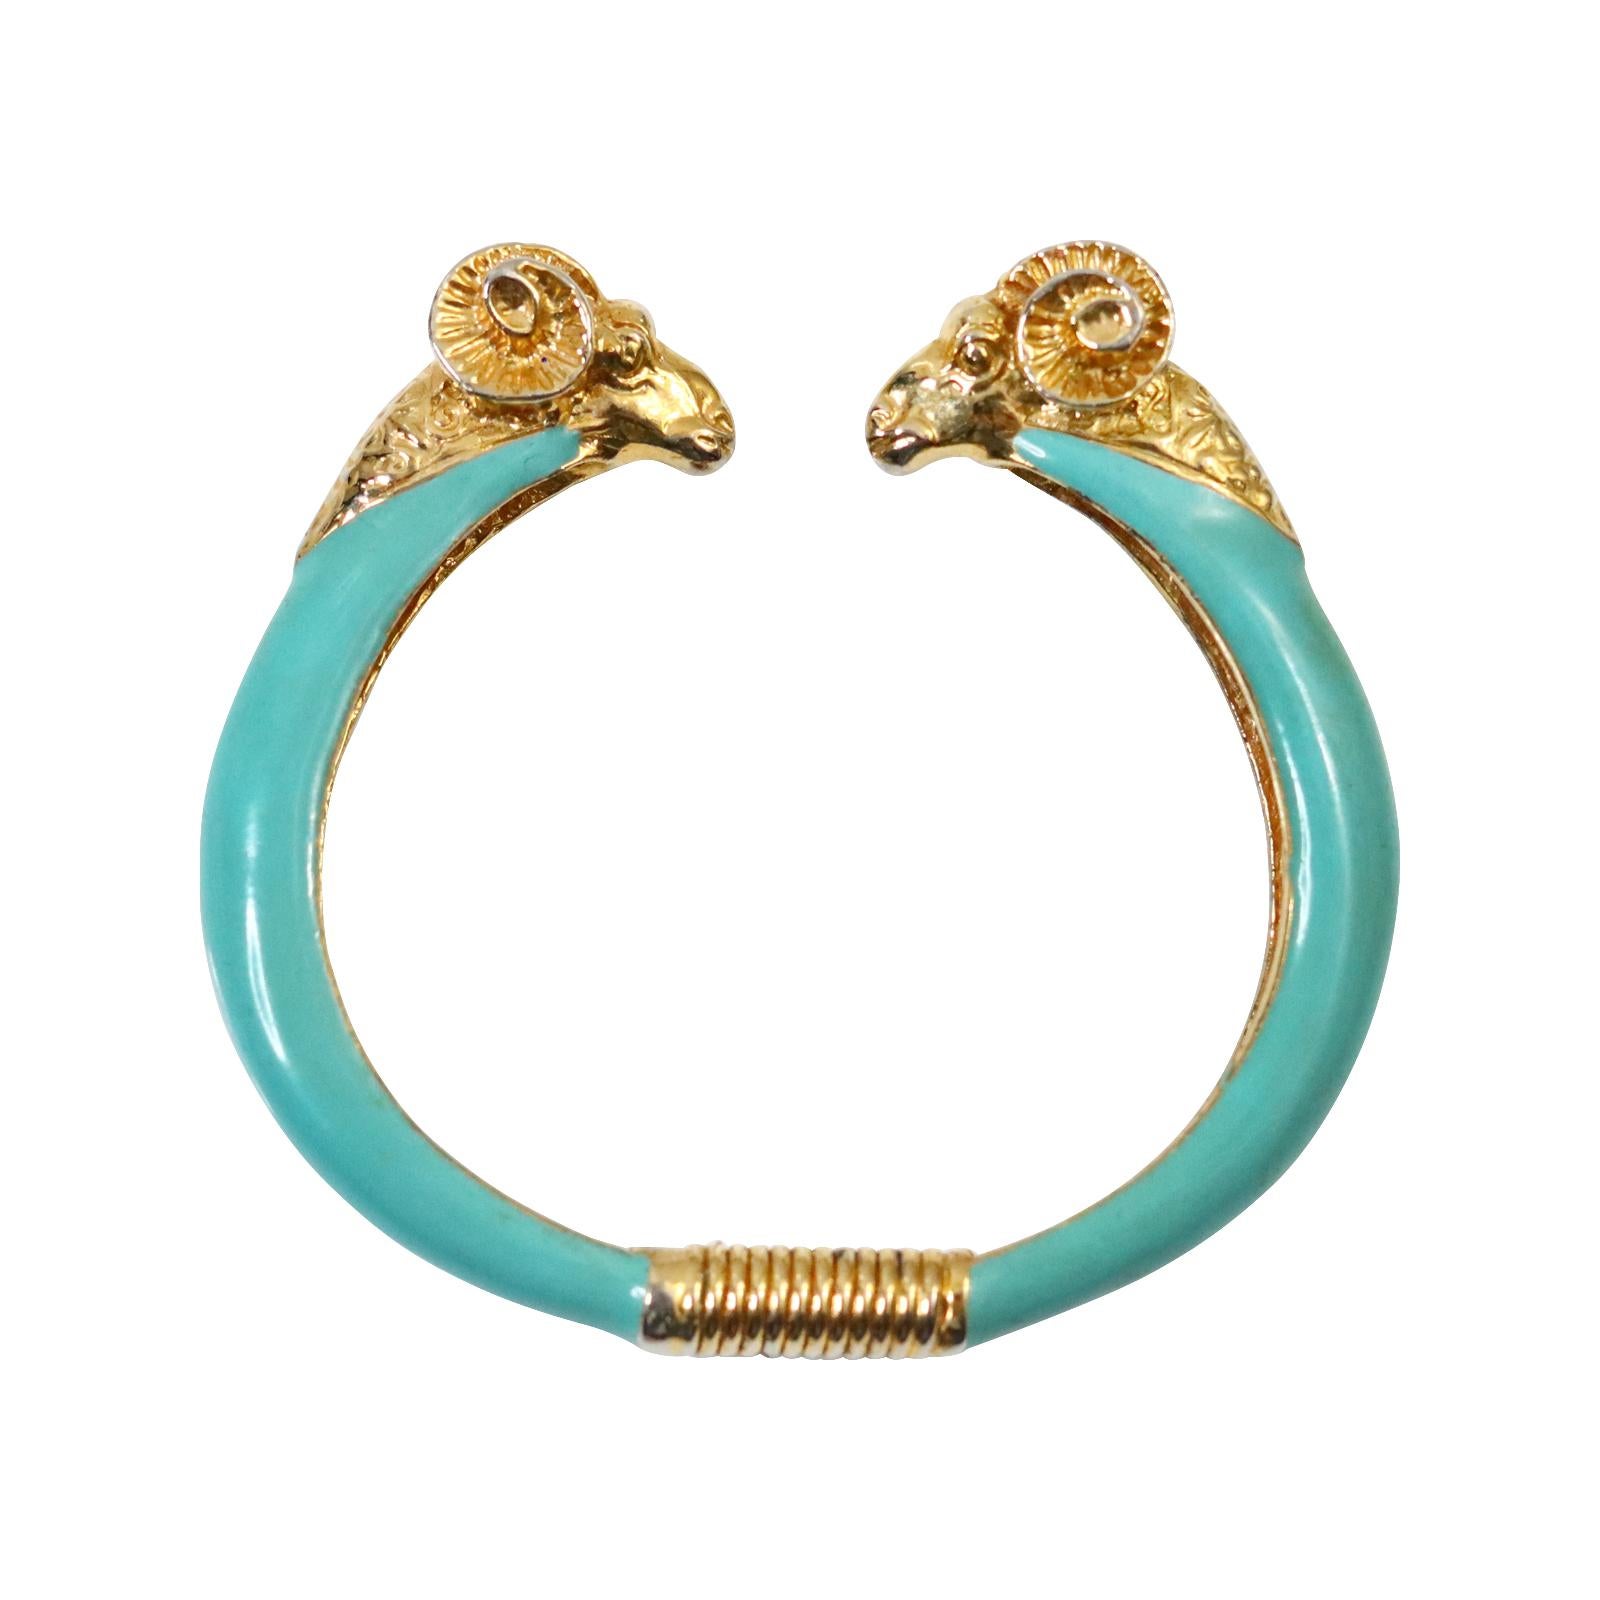 Vintage Donald Stannard Rams Head Bracelet in Turquoise and Gold Circa 1980s. Classic Rams head bracelet in a color that I have never seen.  This is a classic style that has been around since the beginning of time.  There are examples in the